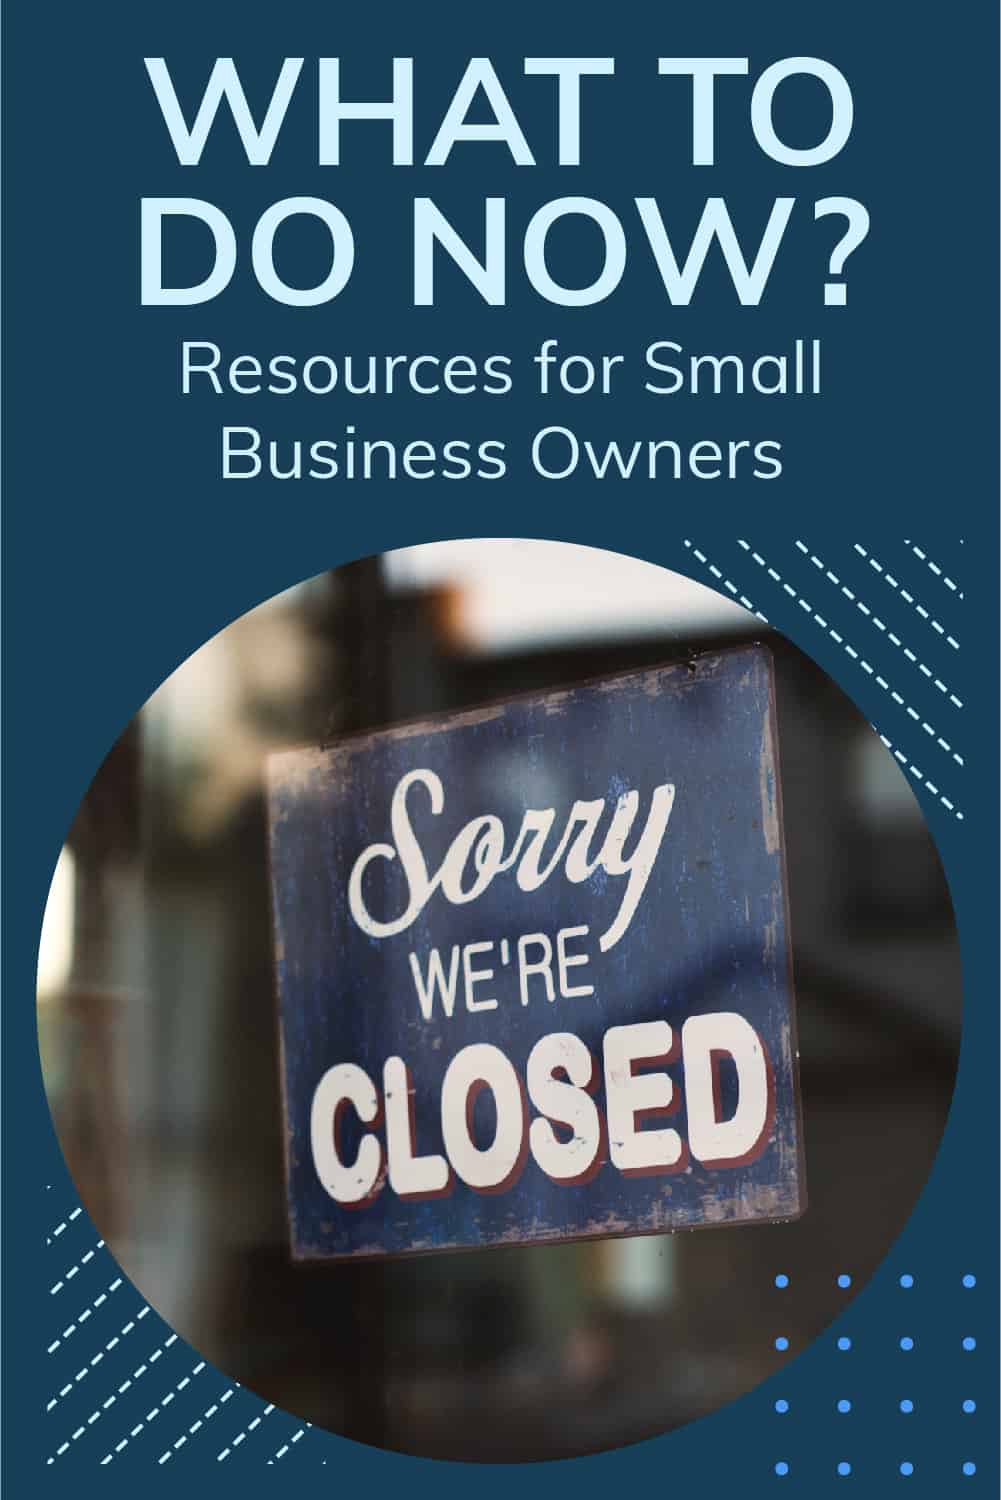 There are many resources available to help small business owners in this difficult time. Here are some resources and tools that may help you. via @scopedesign